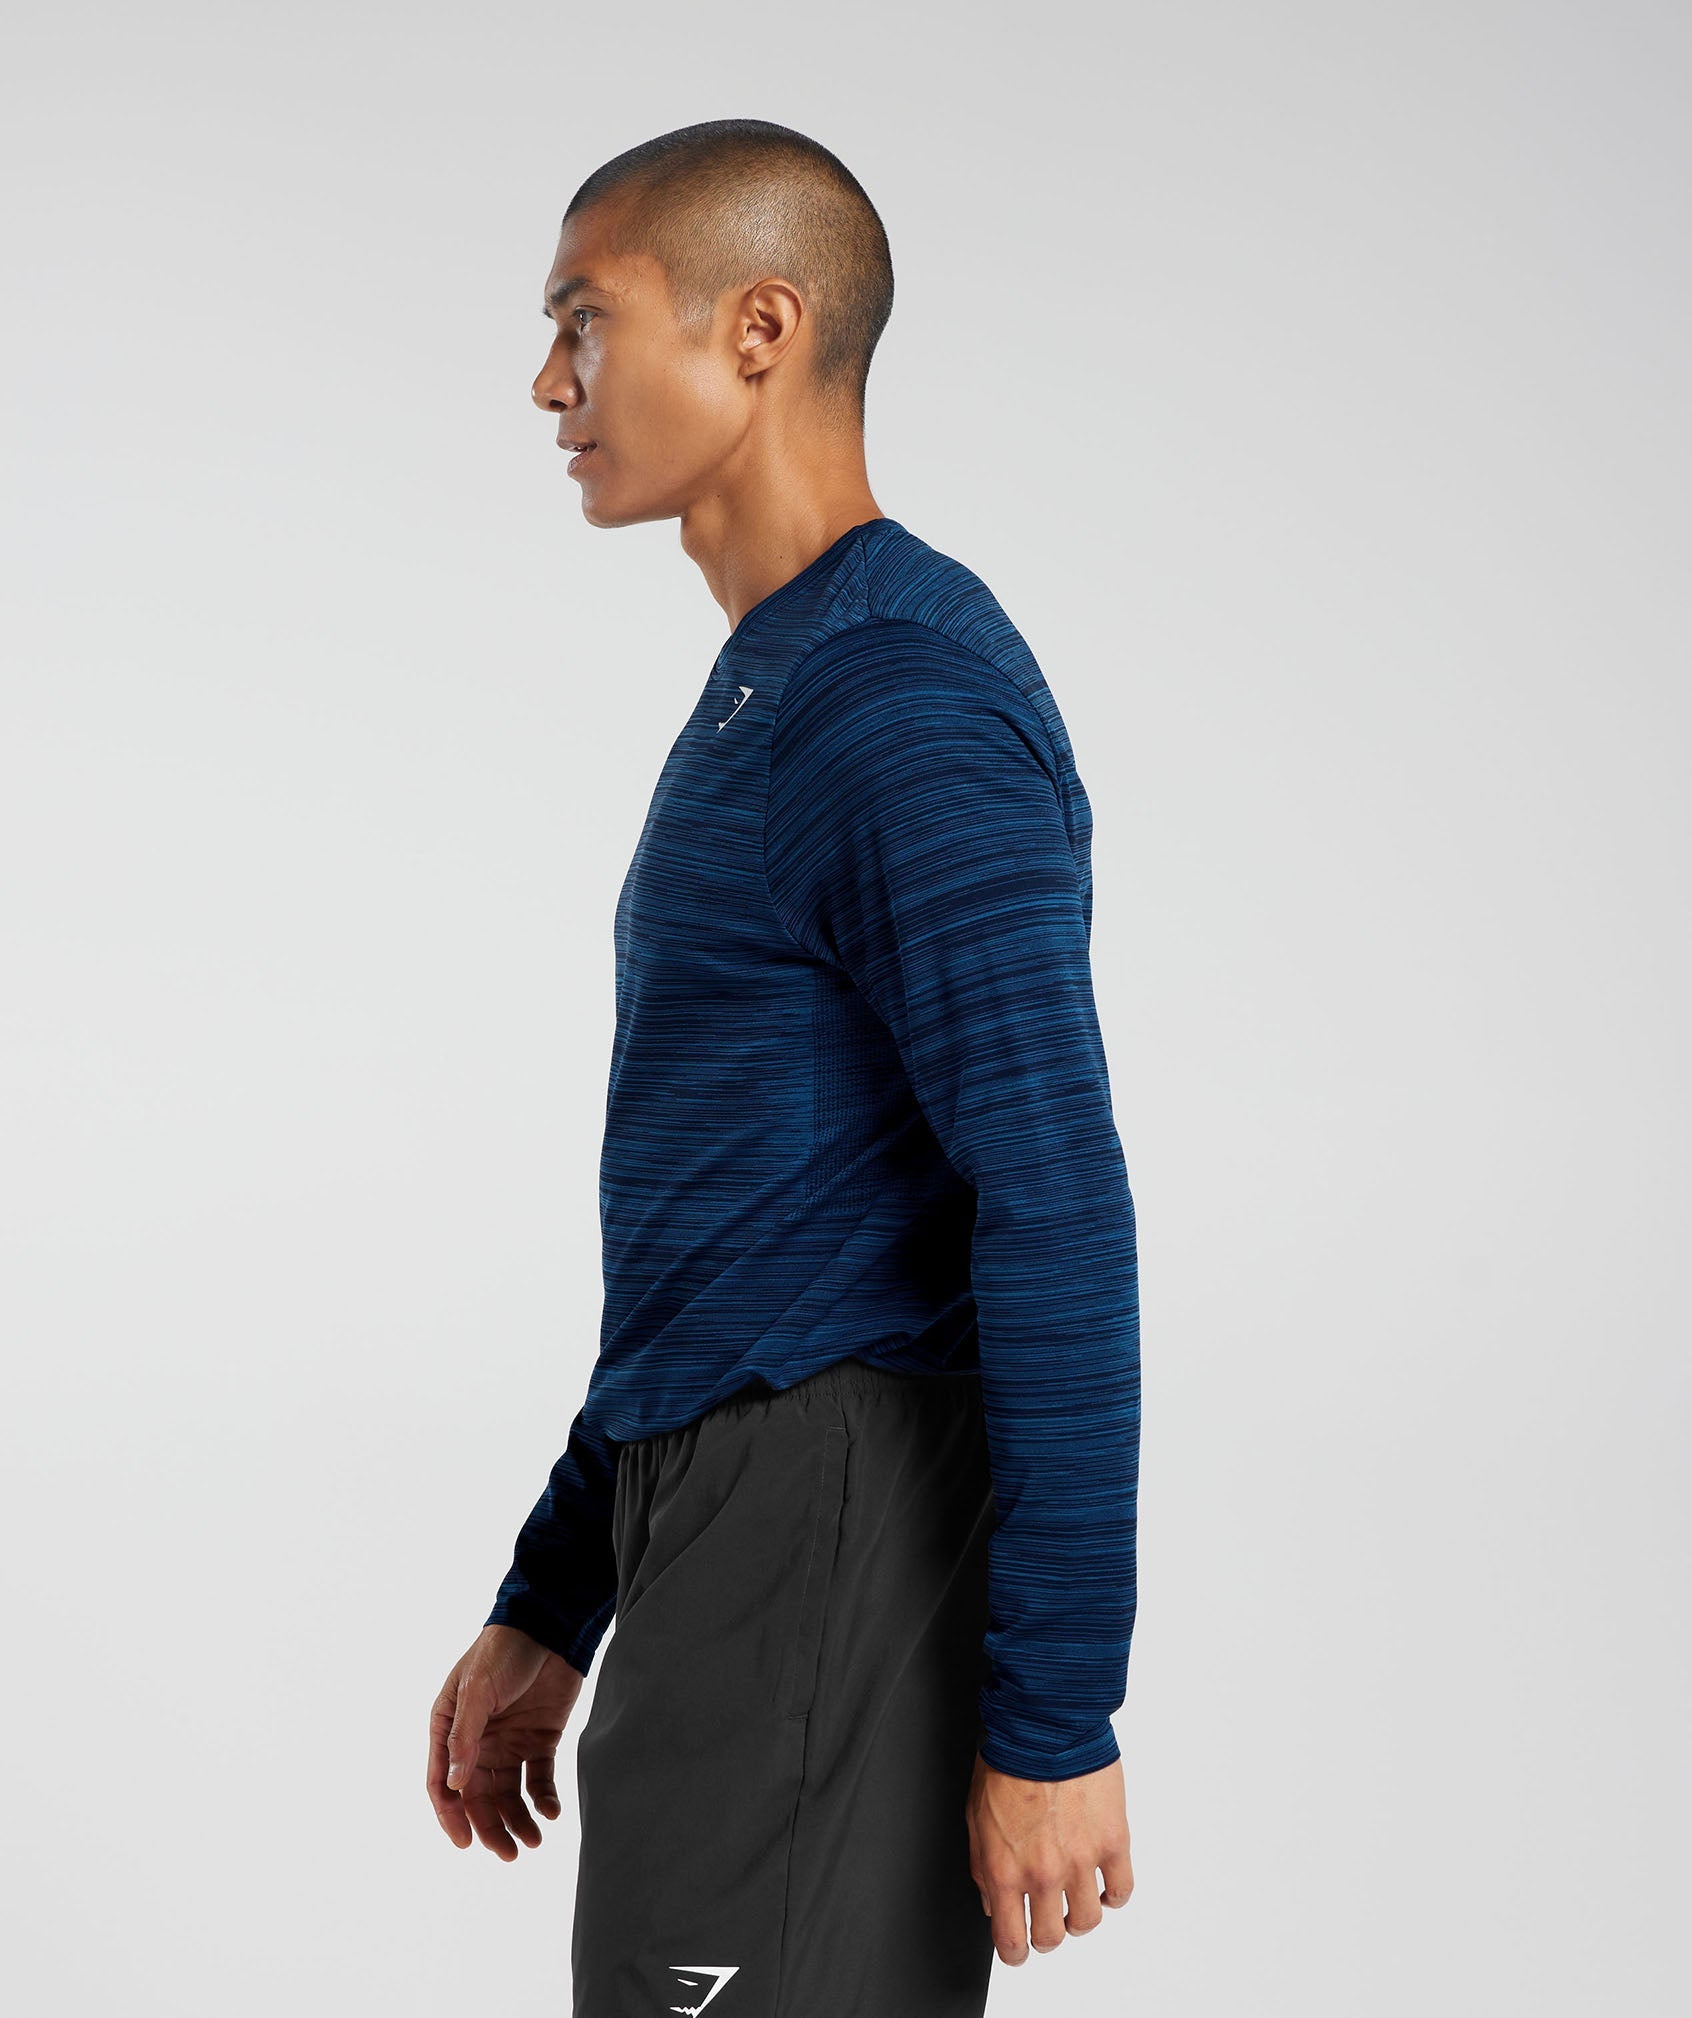 Heather Seamless Long Sleeve T-Shirt in Navy/Core Blue Marl - view 3